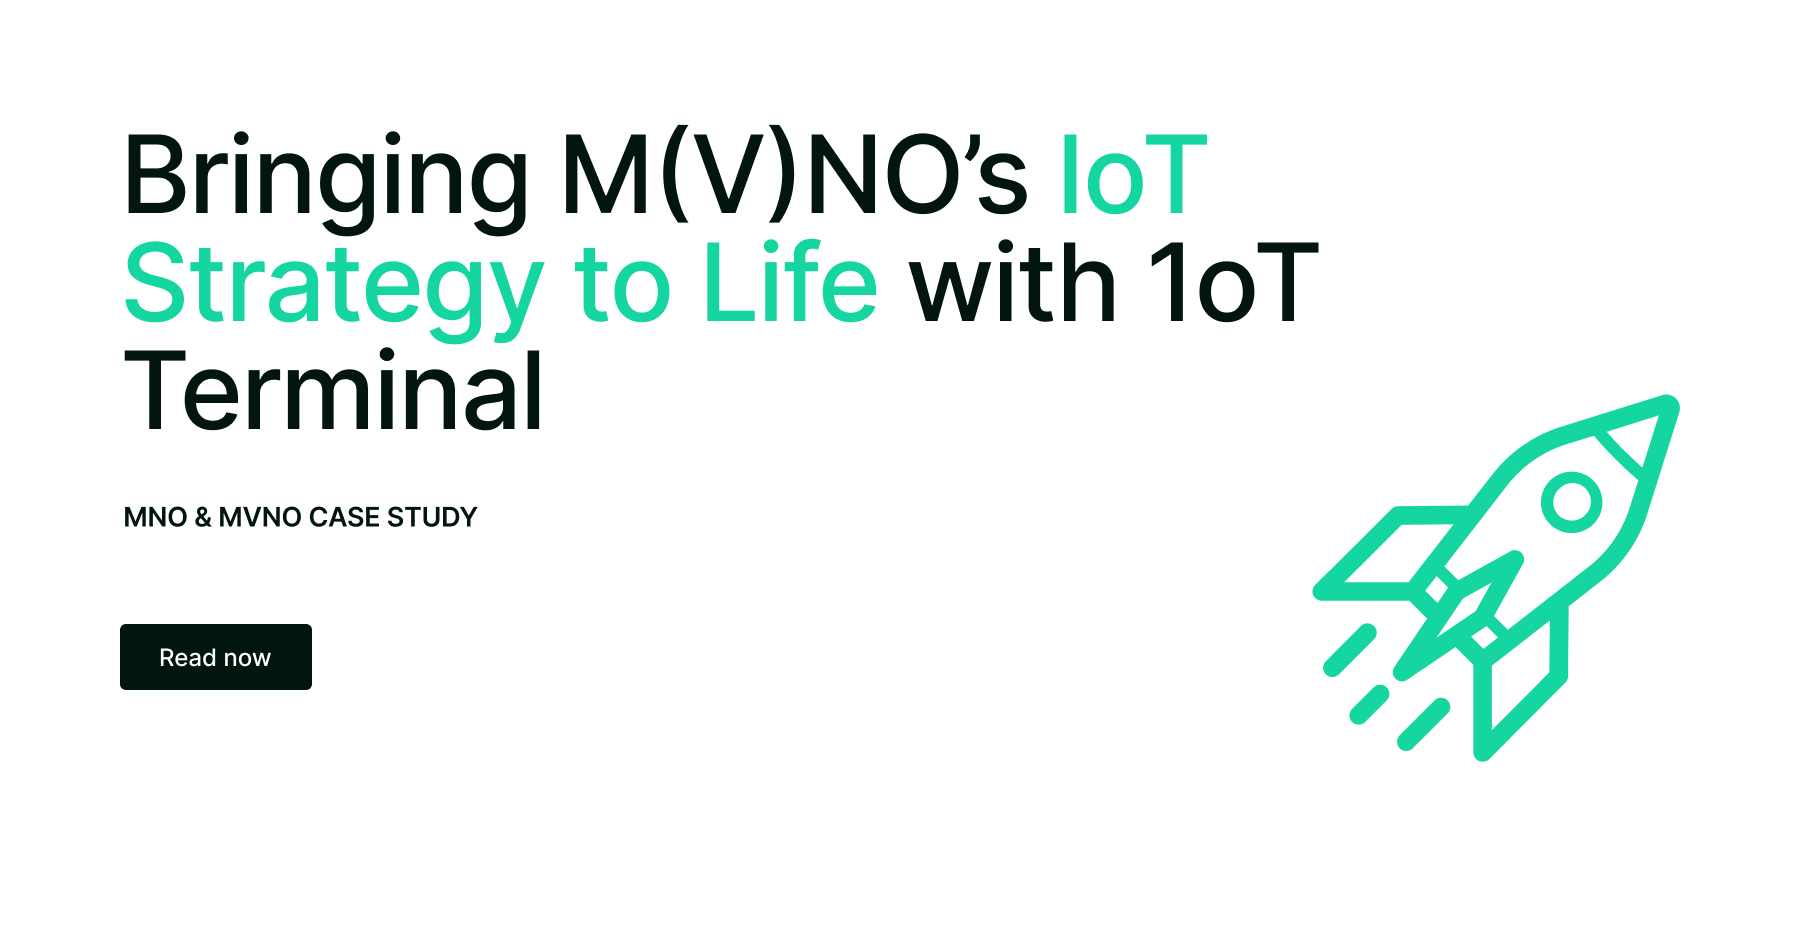 Article cover image for Bringing M(V)NO’s IoT Strategy to Life with 1oT Terminal